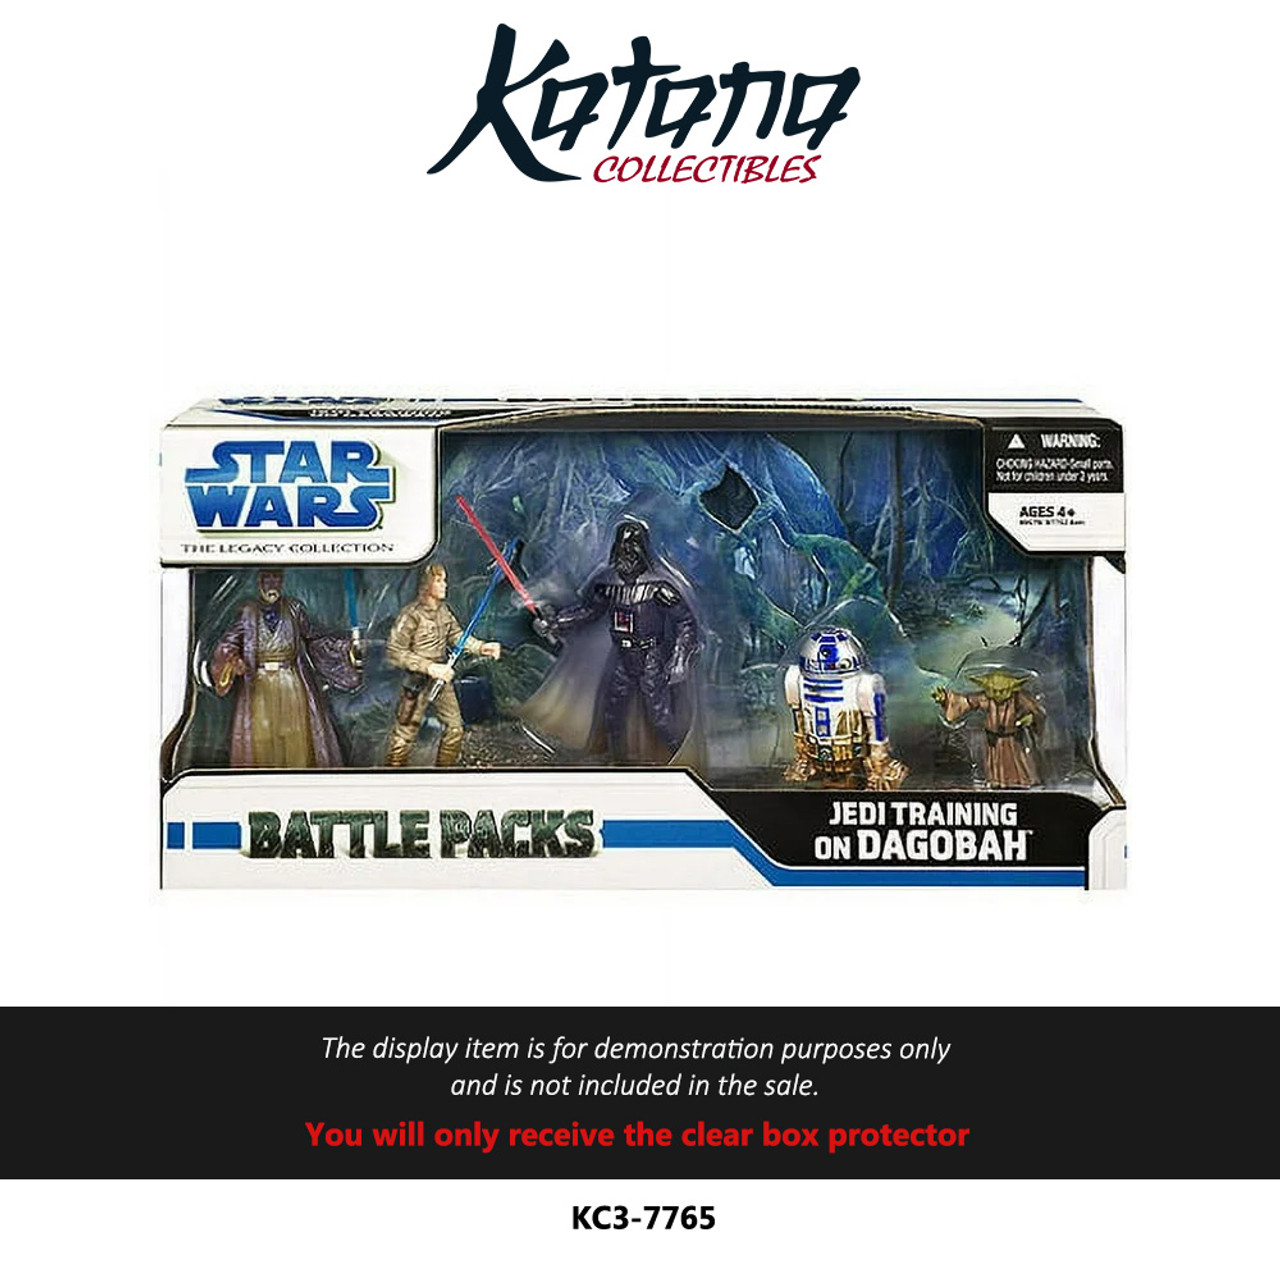 Katana Collectibles Protector For Star Wars The Legacy Collection Battle Packs Jedi Training On Dagobah